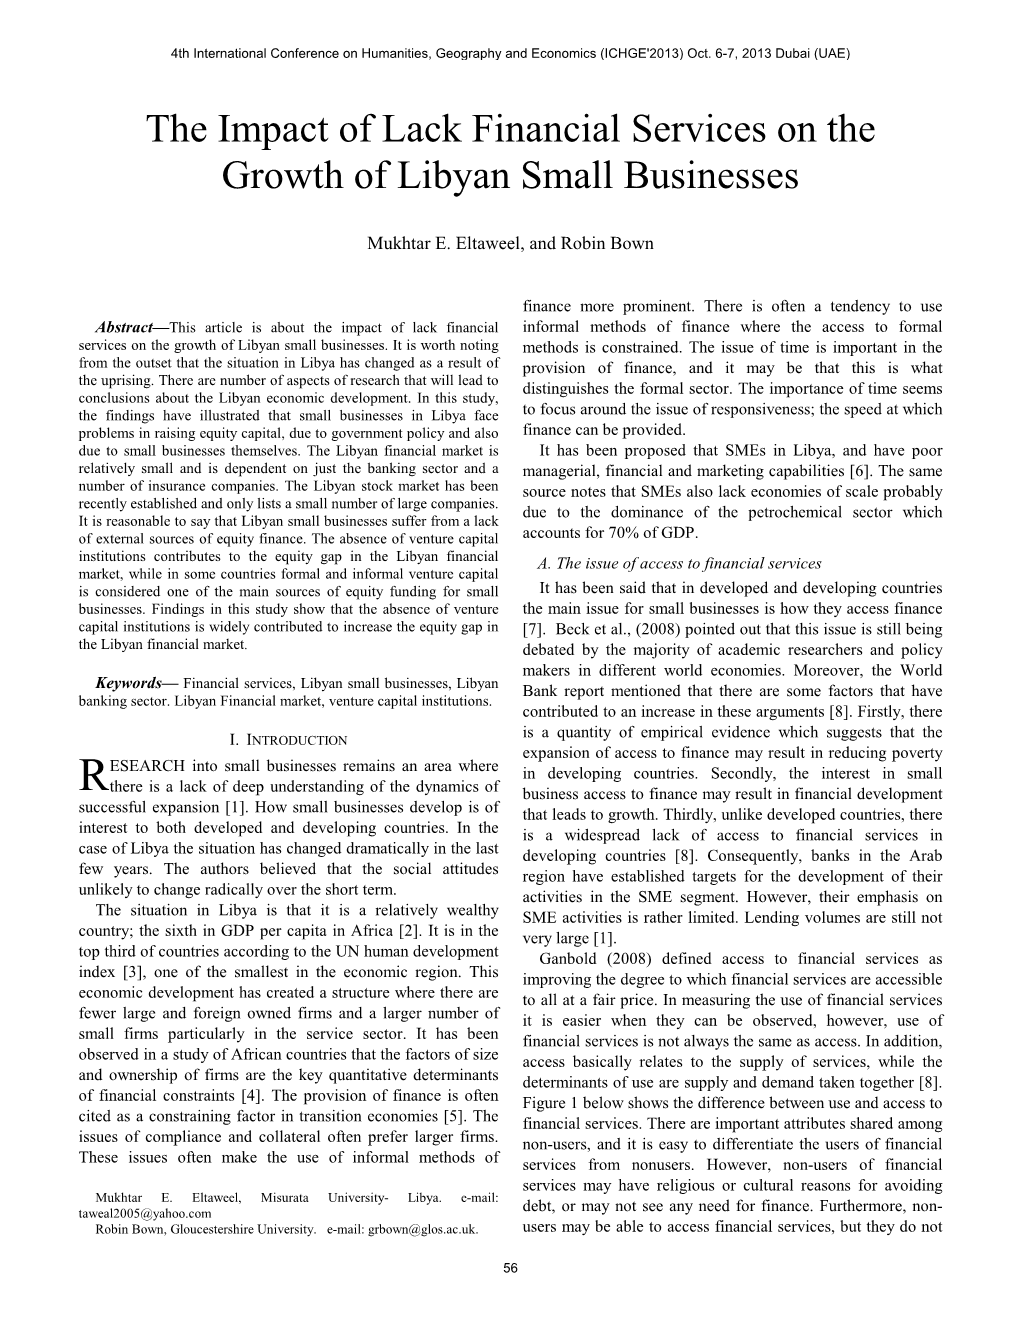 The Impact of Lack Financial Services on the Growth of Libyan Small Businesses